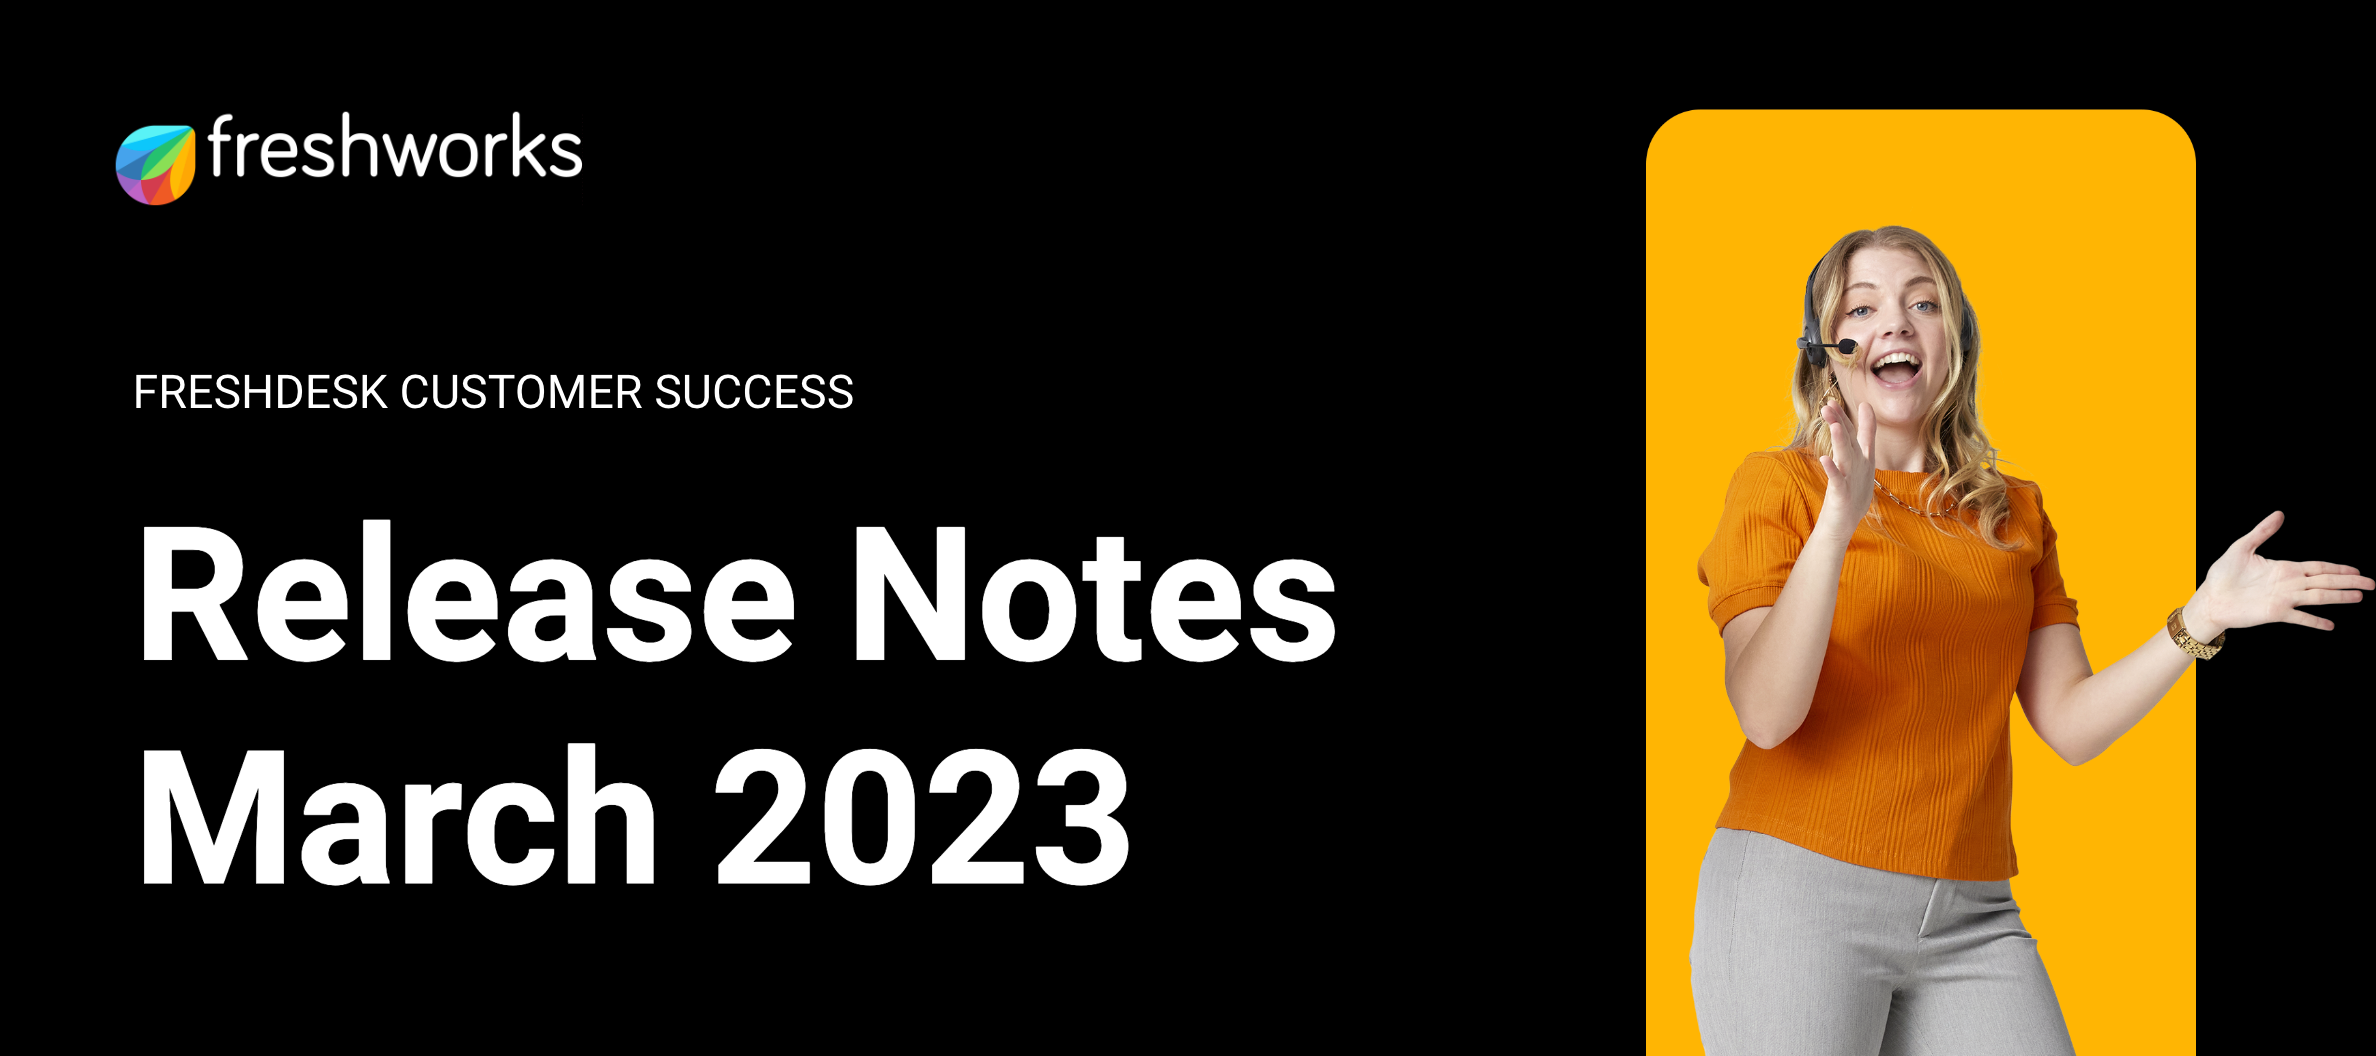 Freshdesk Customer Success Release Notes - March 2023